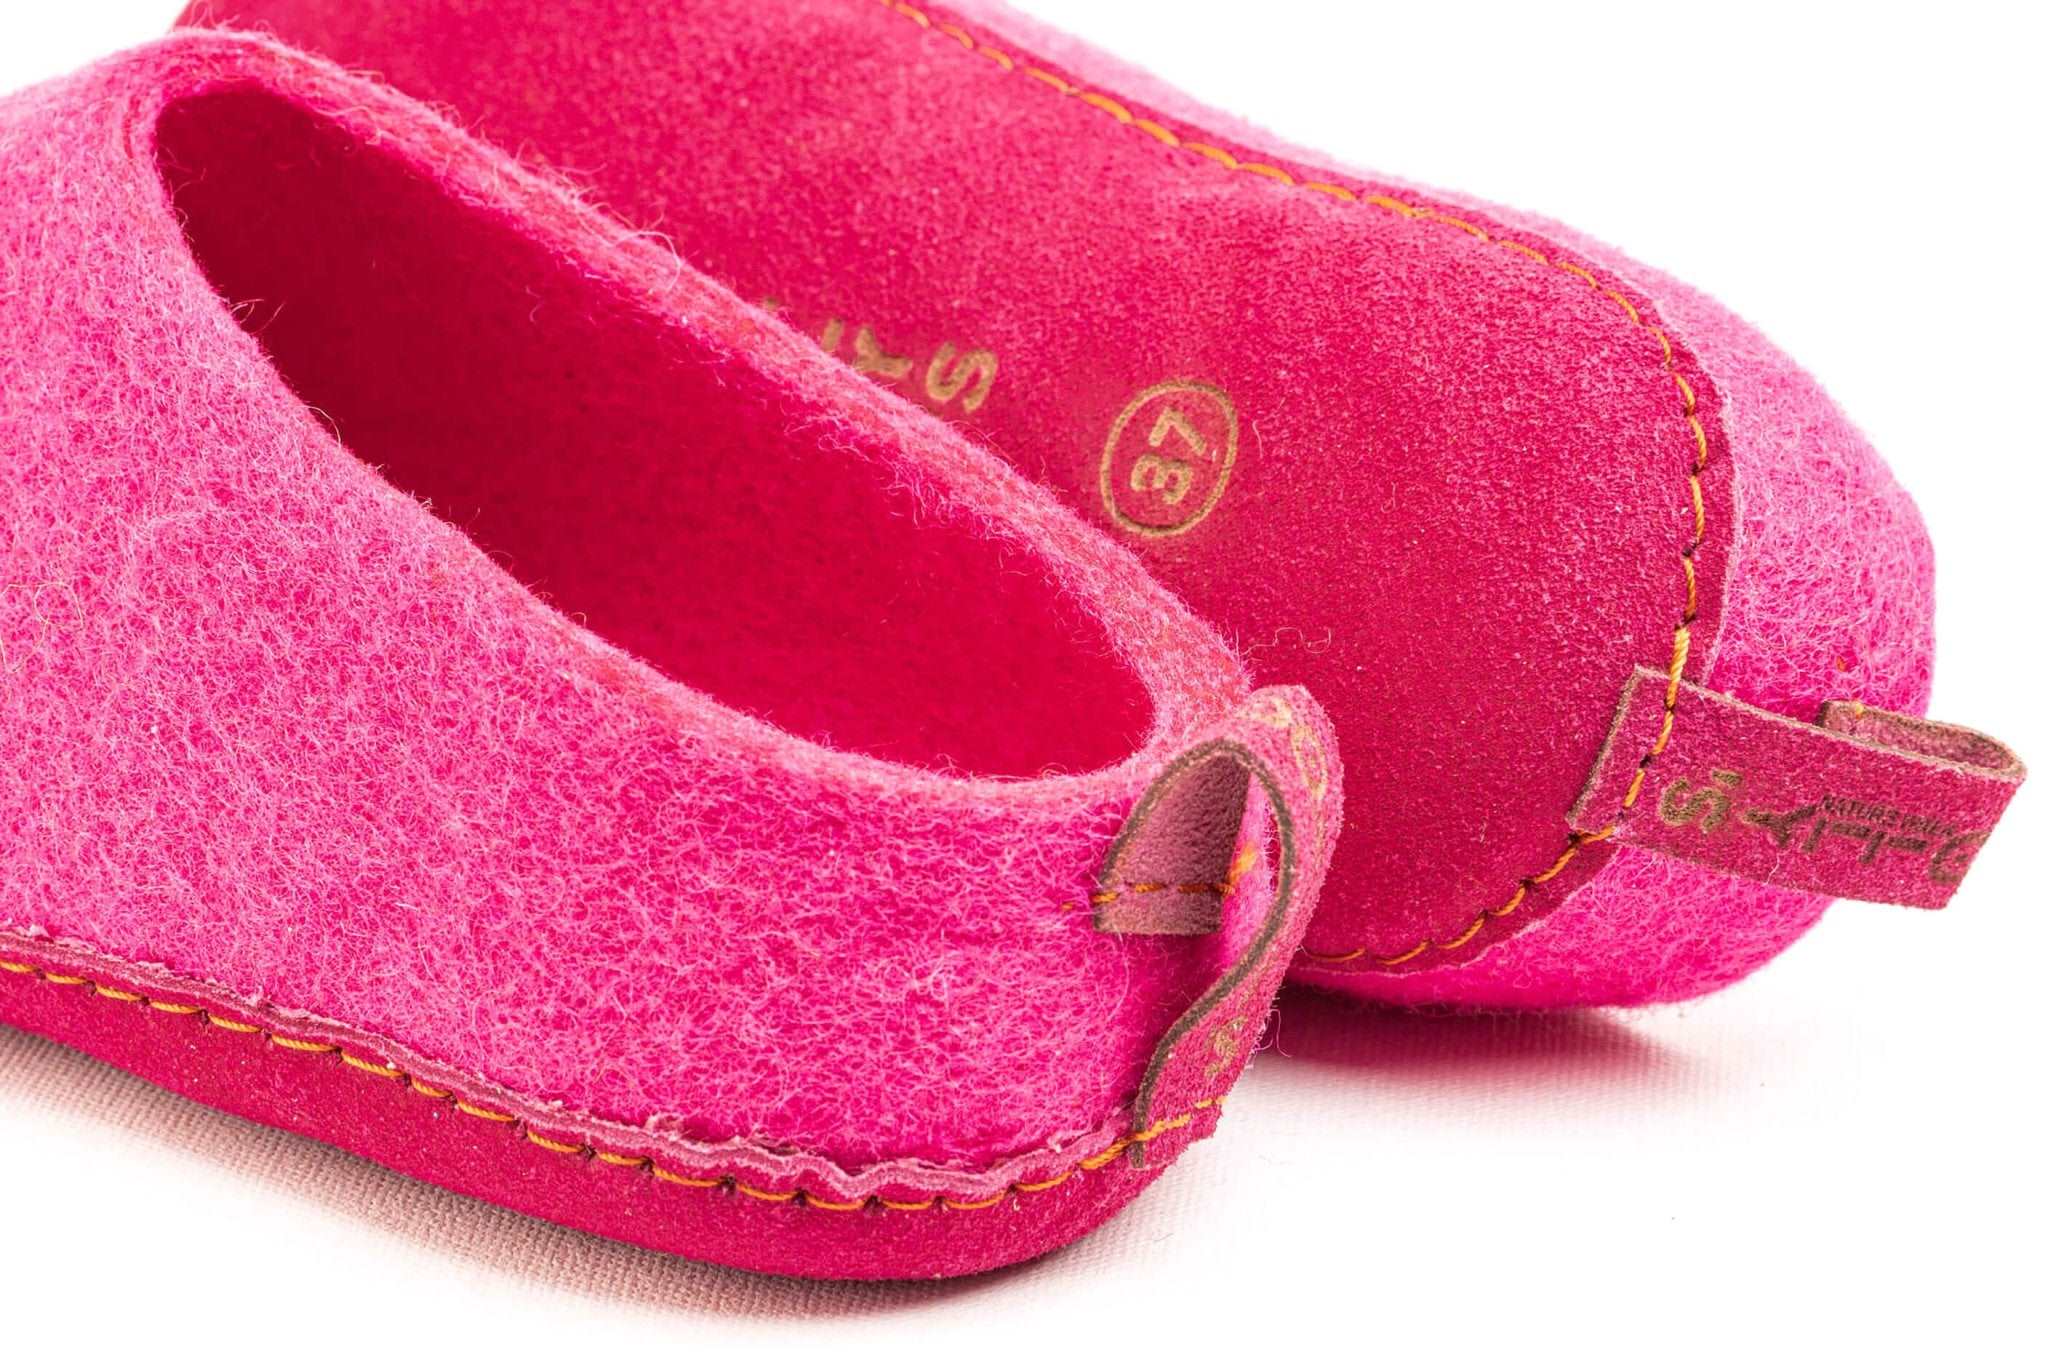 Indoor Open Heel Slippers With Leather Sole - Fuchsia - Woollyes